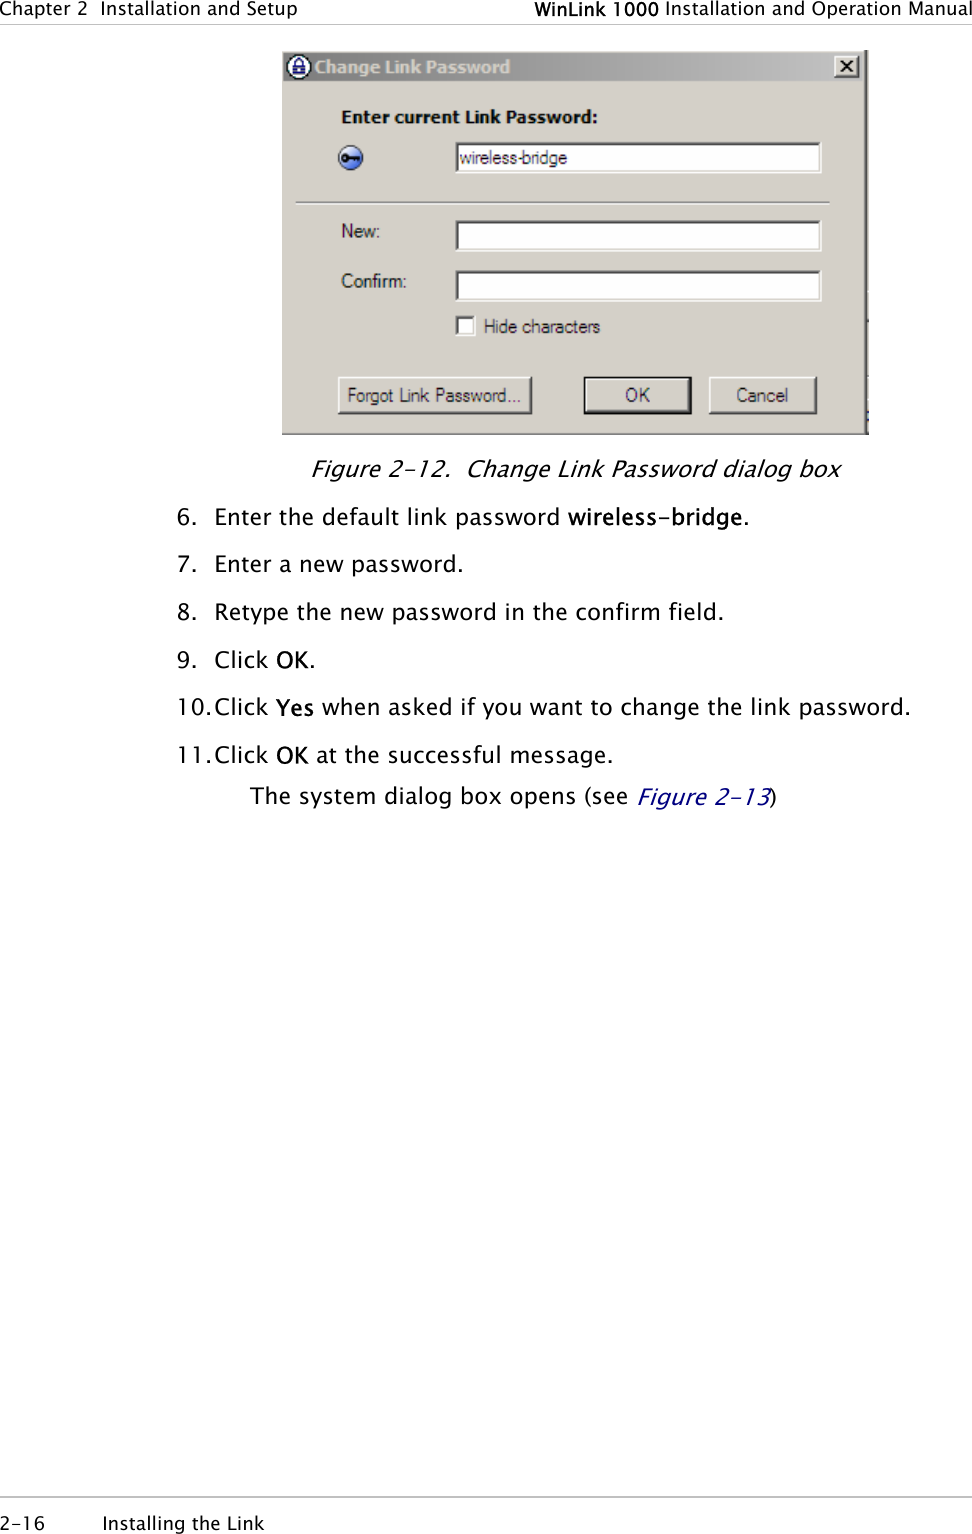 Chapter  2  Installation and Setup  WinLink 1000 Installation and Operation Manual  Figure  2-12.  Change Link Password dialog box 6. Enter the default link password wireless-bridge. 7. Enter a new password. 8. Retype the new password in the confirm field. 9. Click OK. 10. Click Yes when asked if you want to change the link password. 11. Click OK at the successful message. The system dialog box opens (see Figure  2-13) 2-16 Installing the Link   